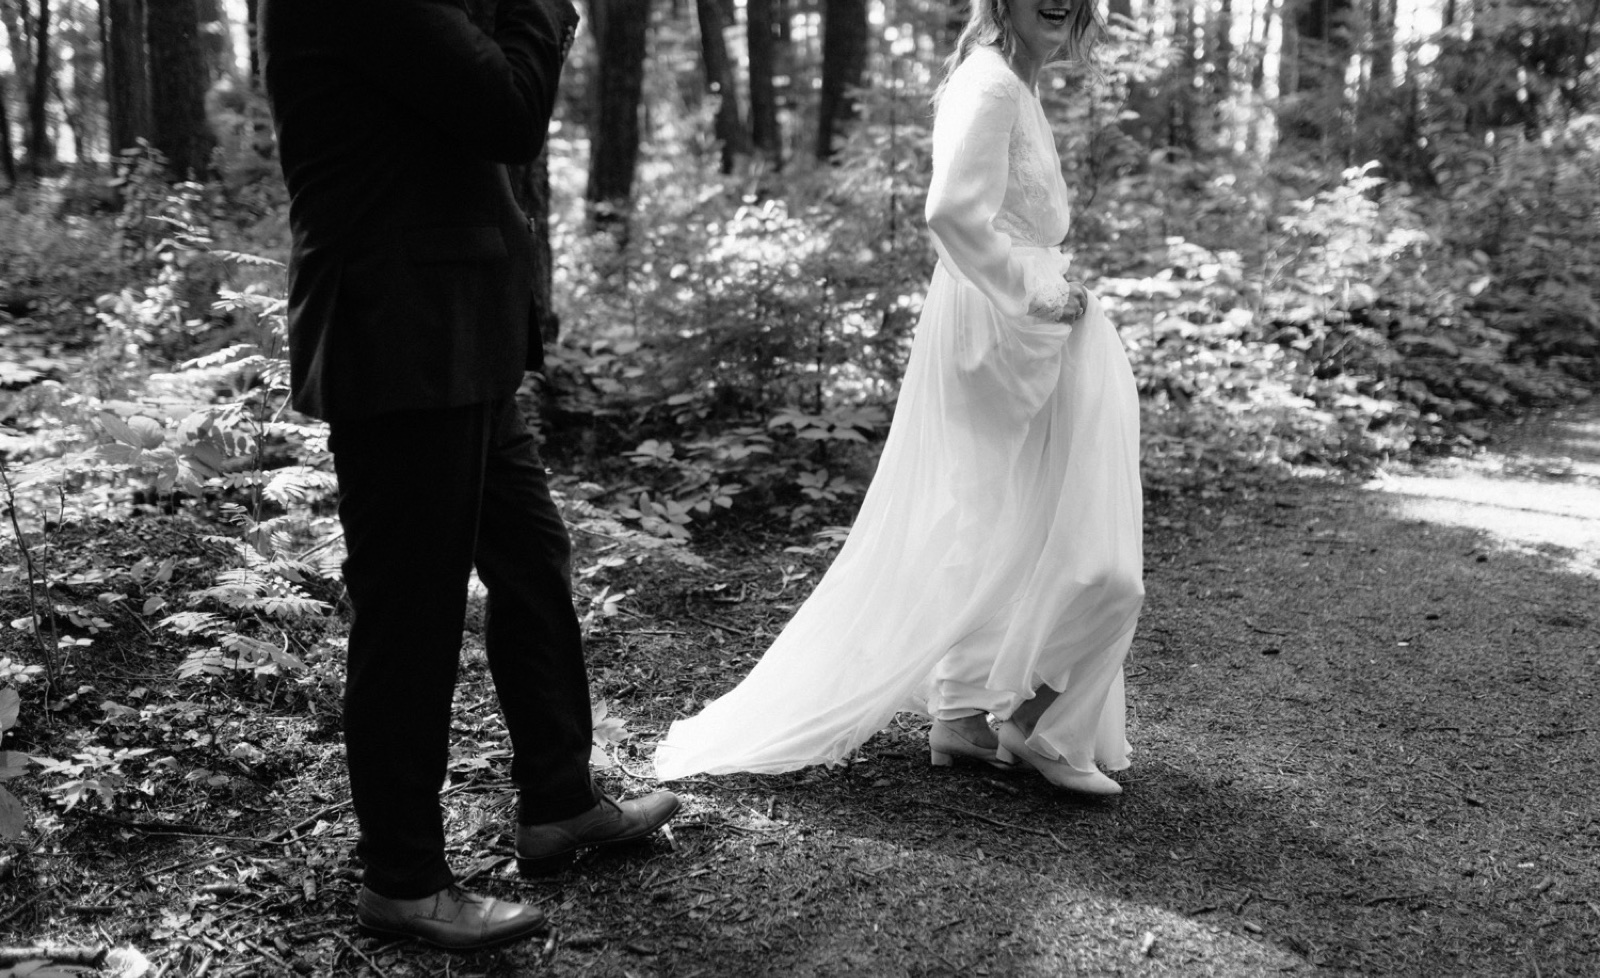 Bride with a classic dress wearing kitty heels for a forest wedding in British Columbia